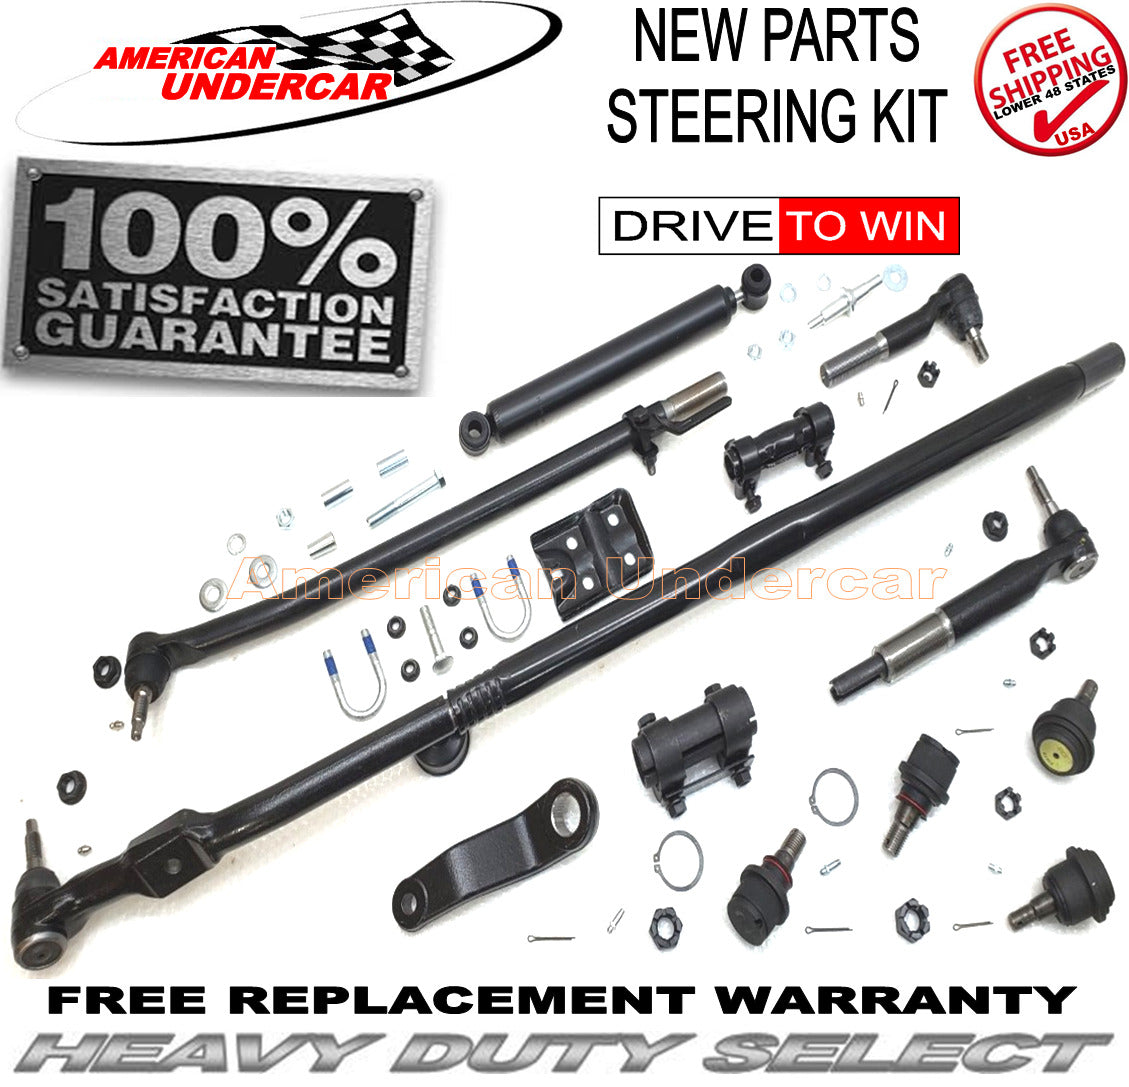 HD New T Design Upgrade Complete Kit for 2009-2012 Dodge Ram 2500, 3500 4x4